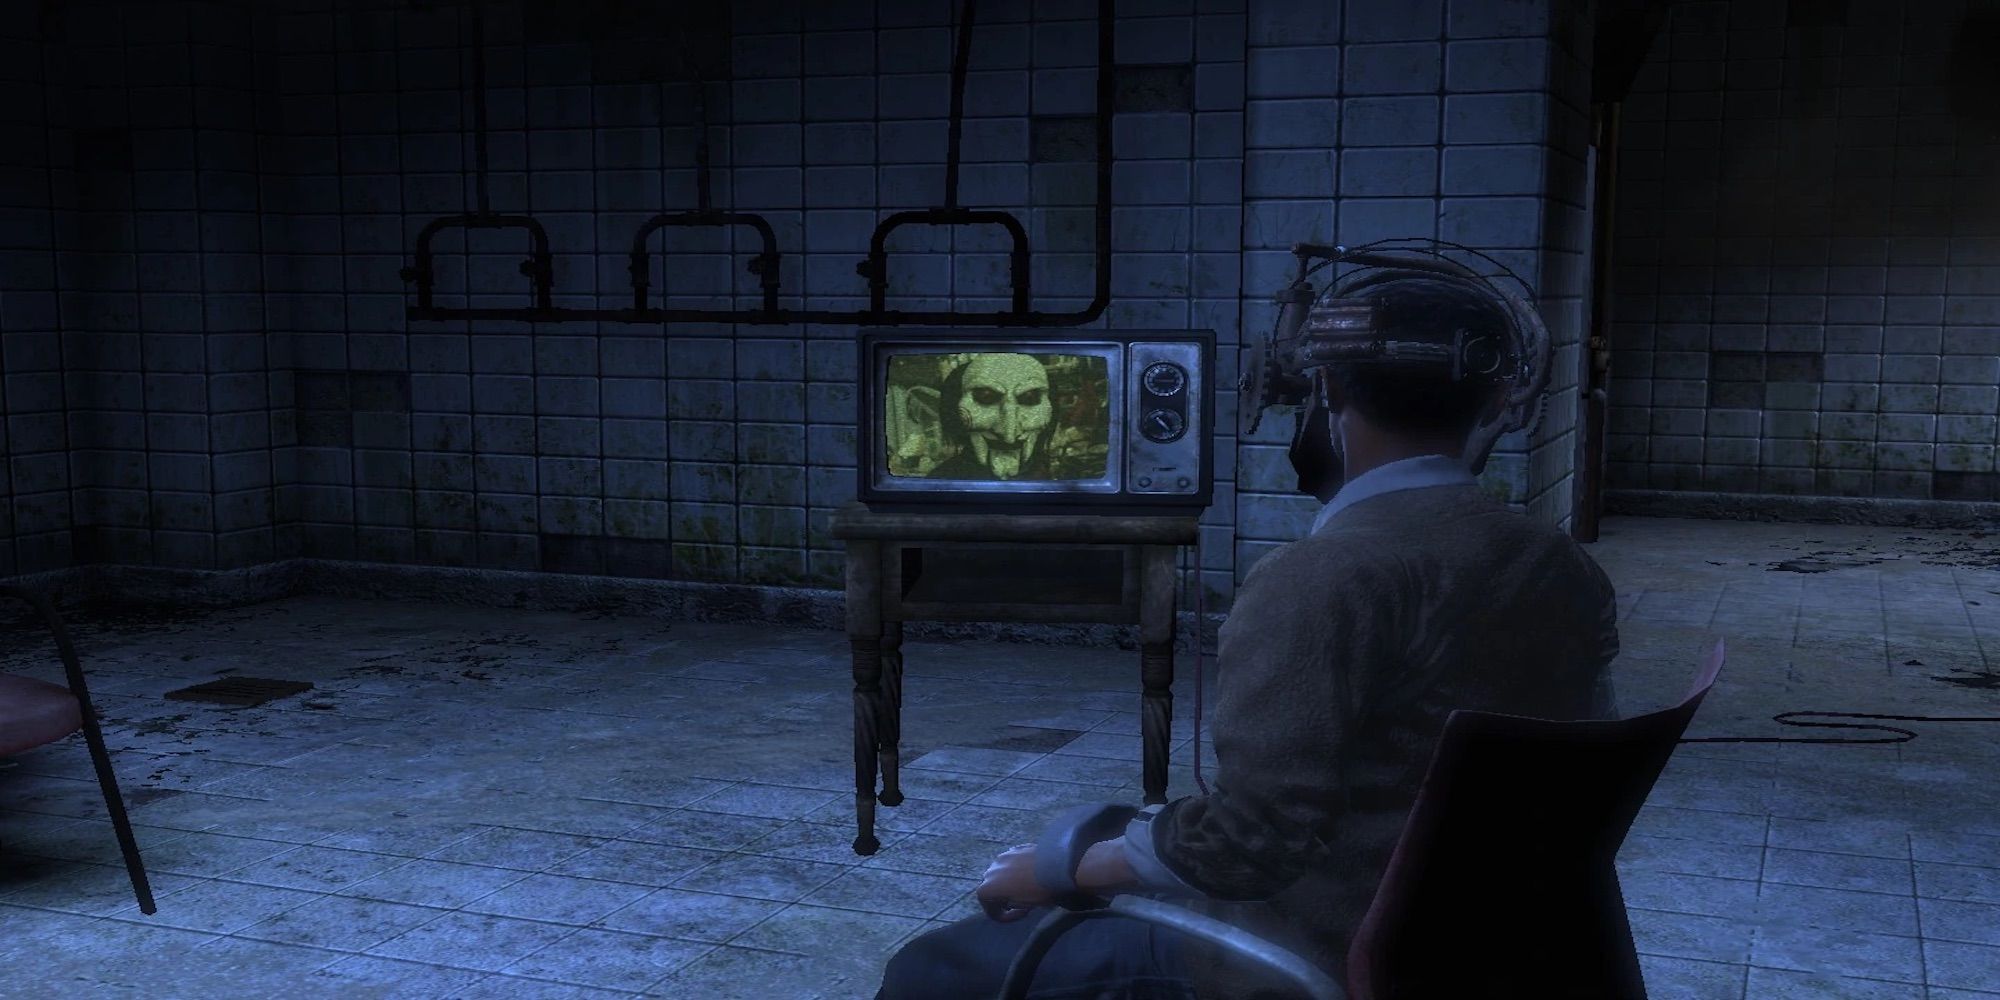 Tapp watching Jigsaw on TV (Saw: The Video Game)